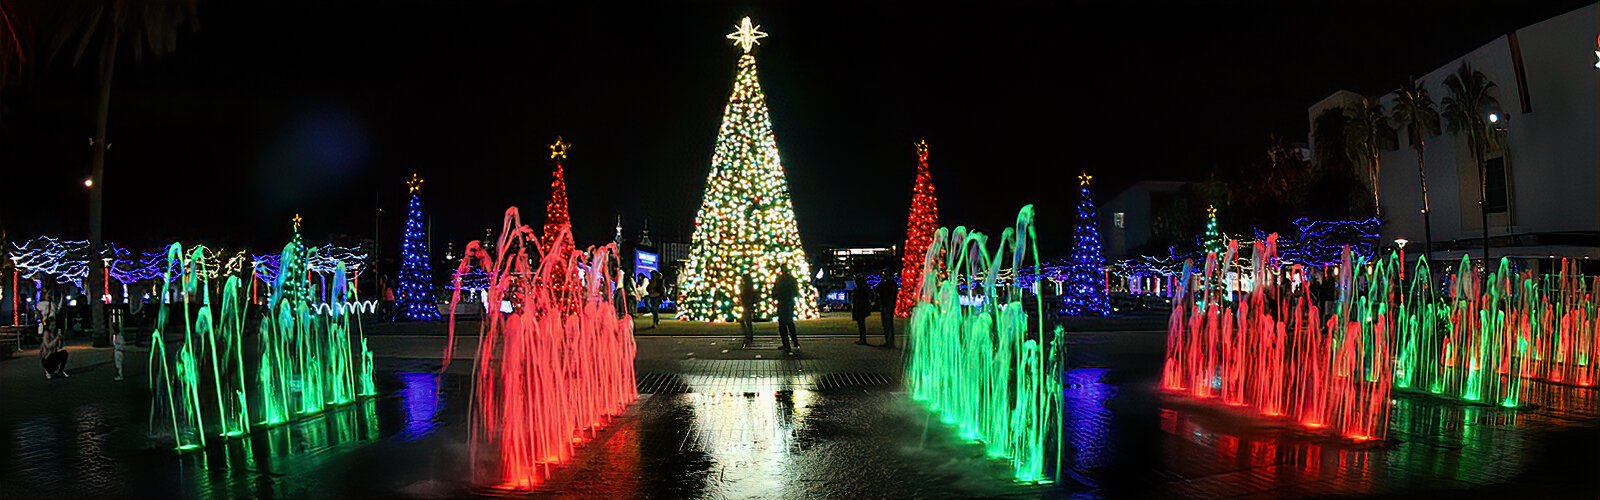 The lighted splash pad adds its Christmas colors to the lights of the Christmas trees display.